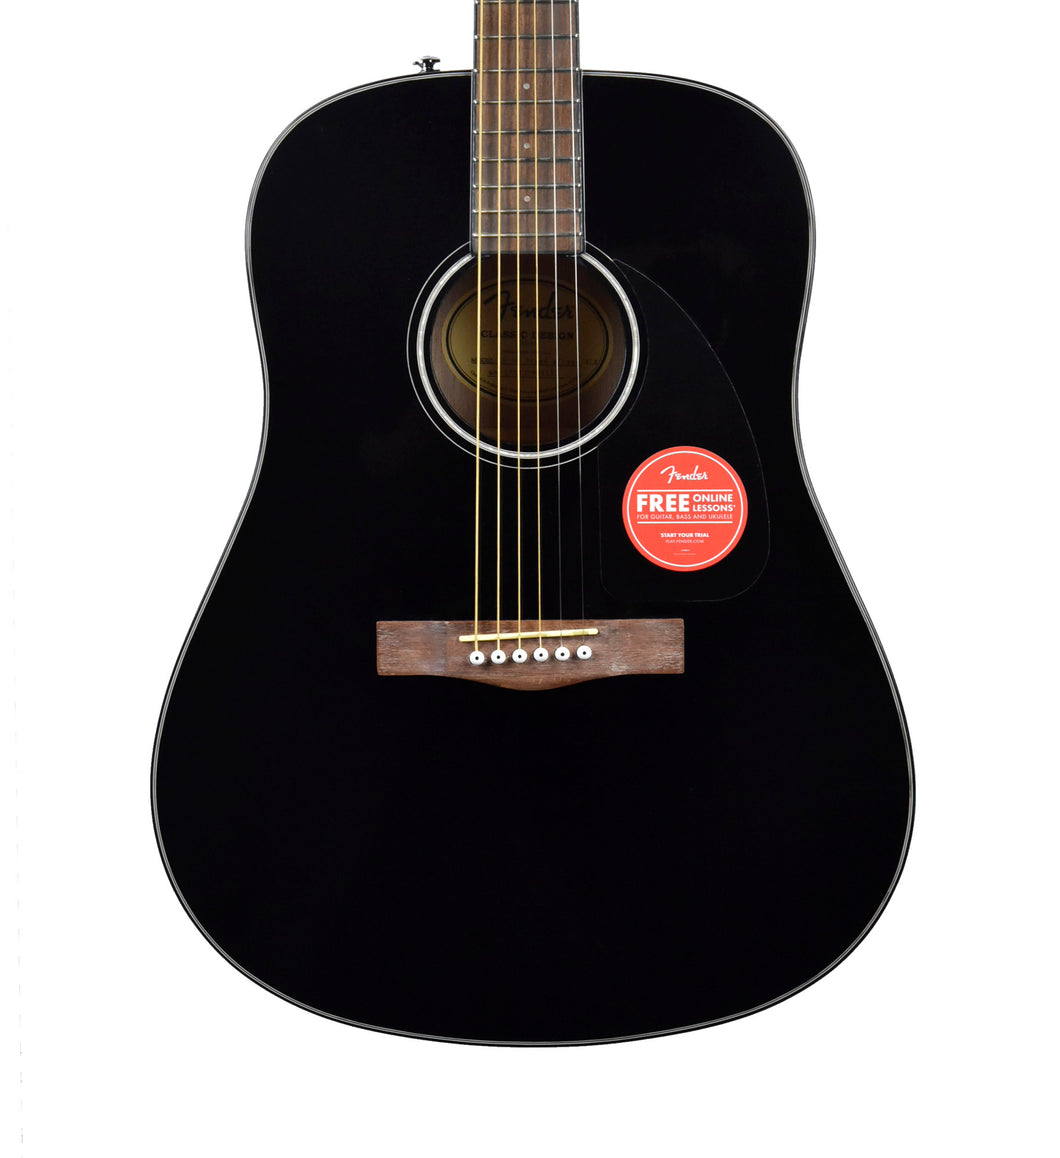 Fender CD-60 Dreadnought V3 Acoustic Guitar w/Case in Black IPS230901217 - The Music Gallery